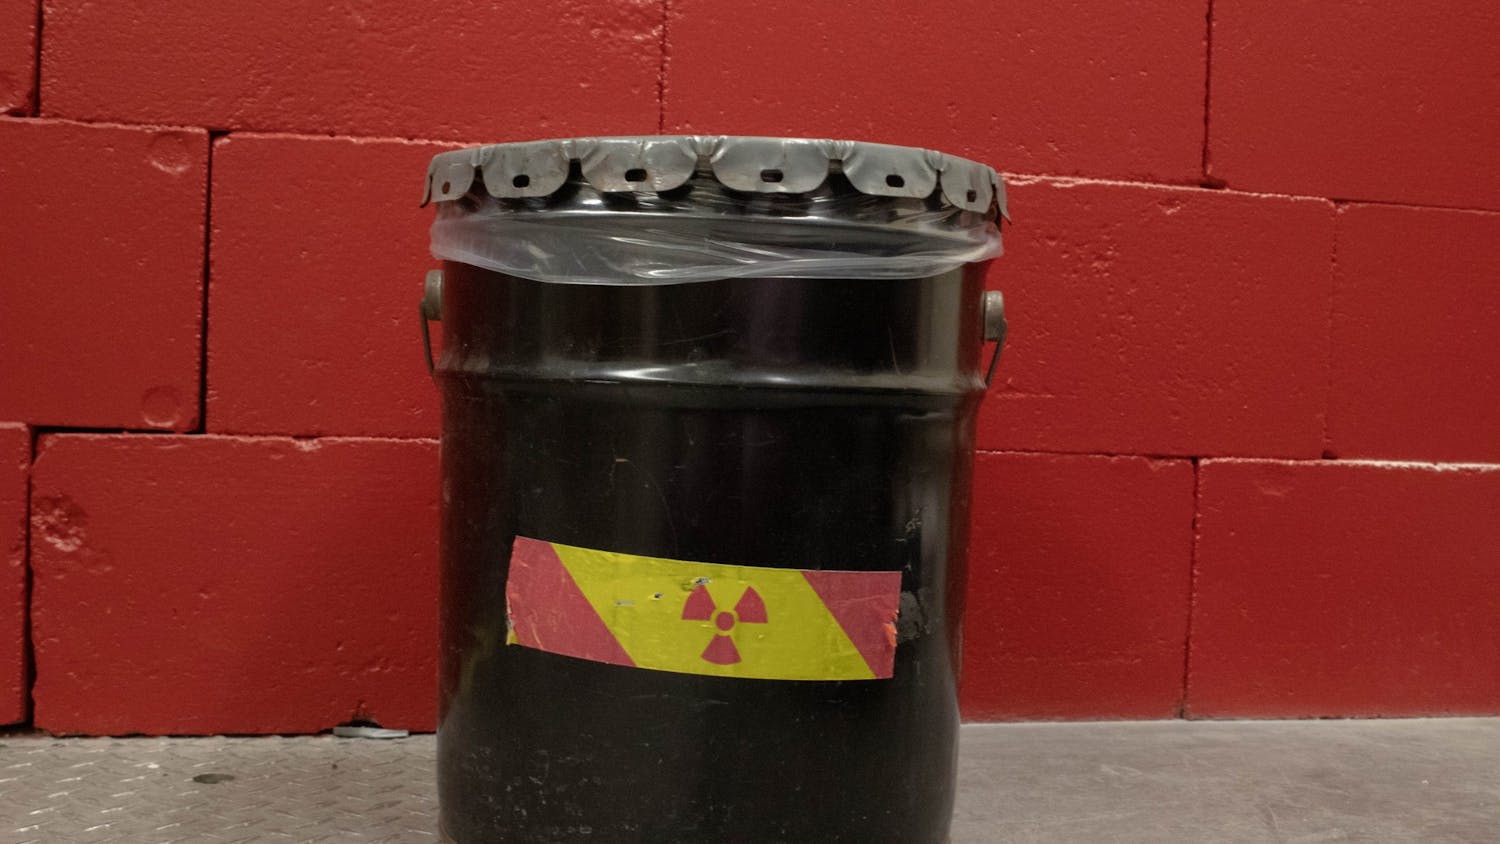 Small bin of radioactive waste at the Nuclear Engineering building at UNM 03_24_23.jpg